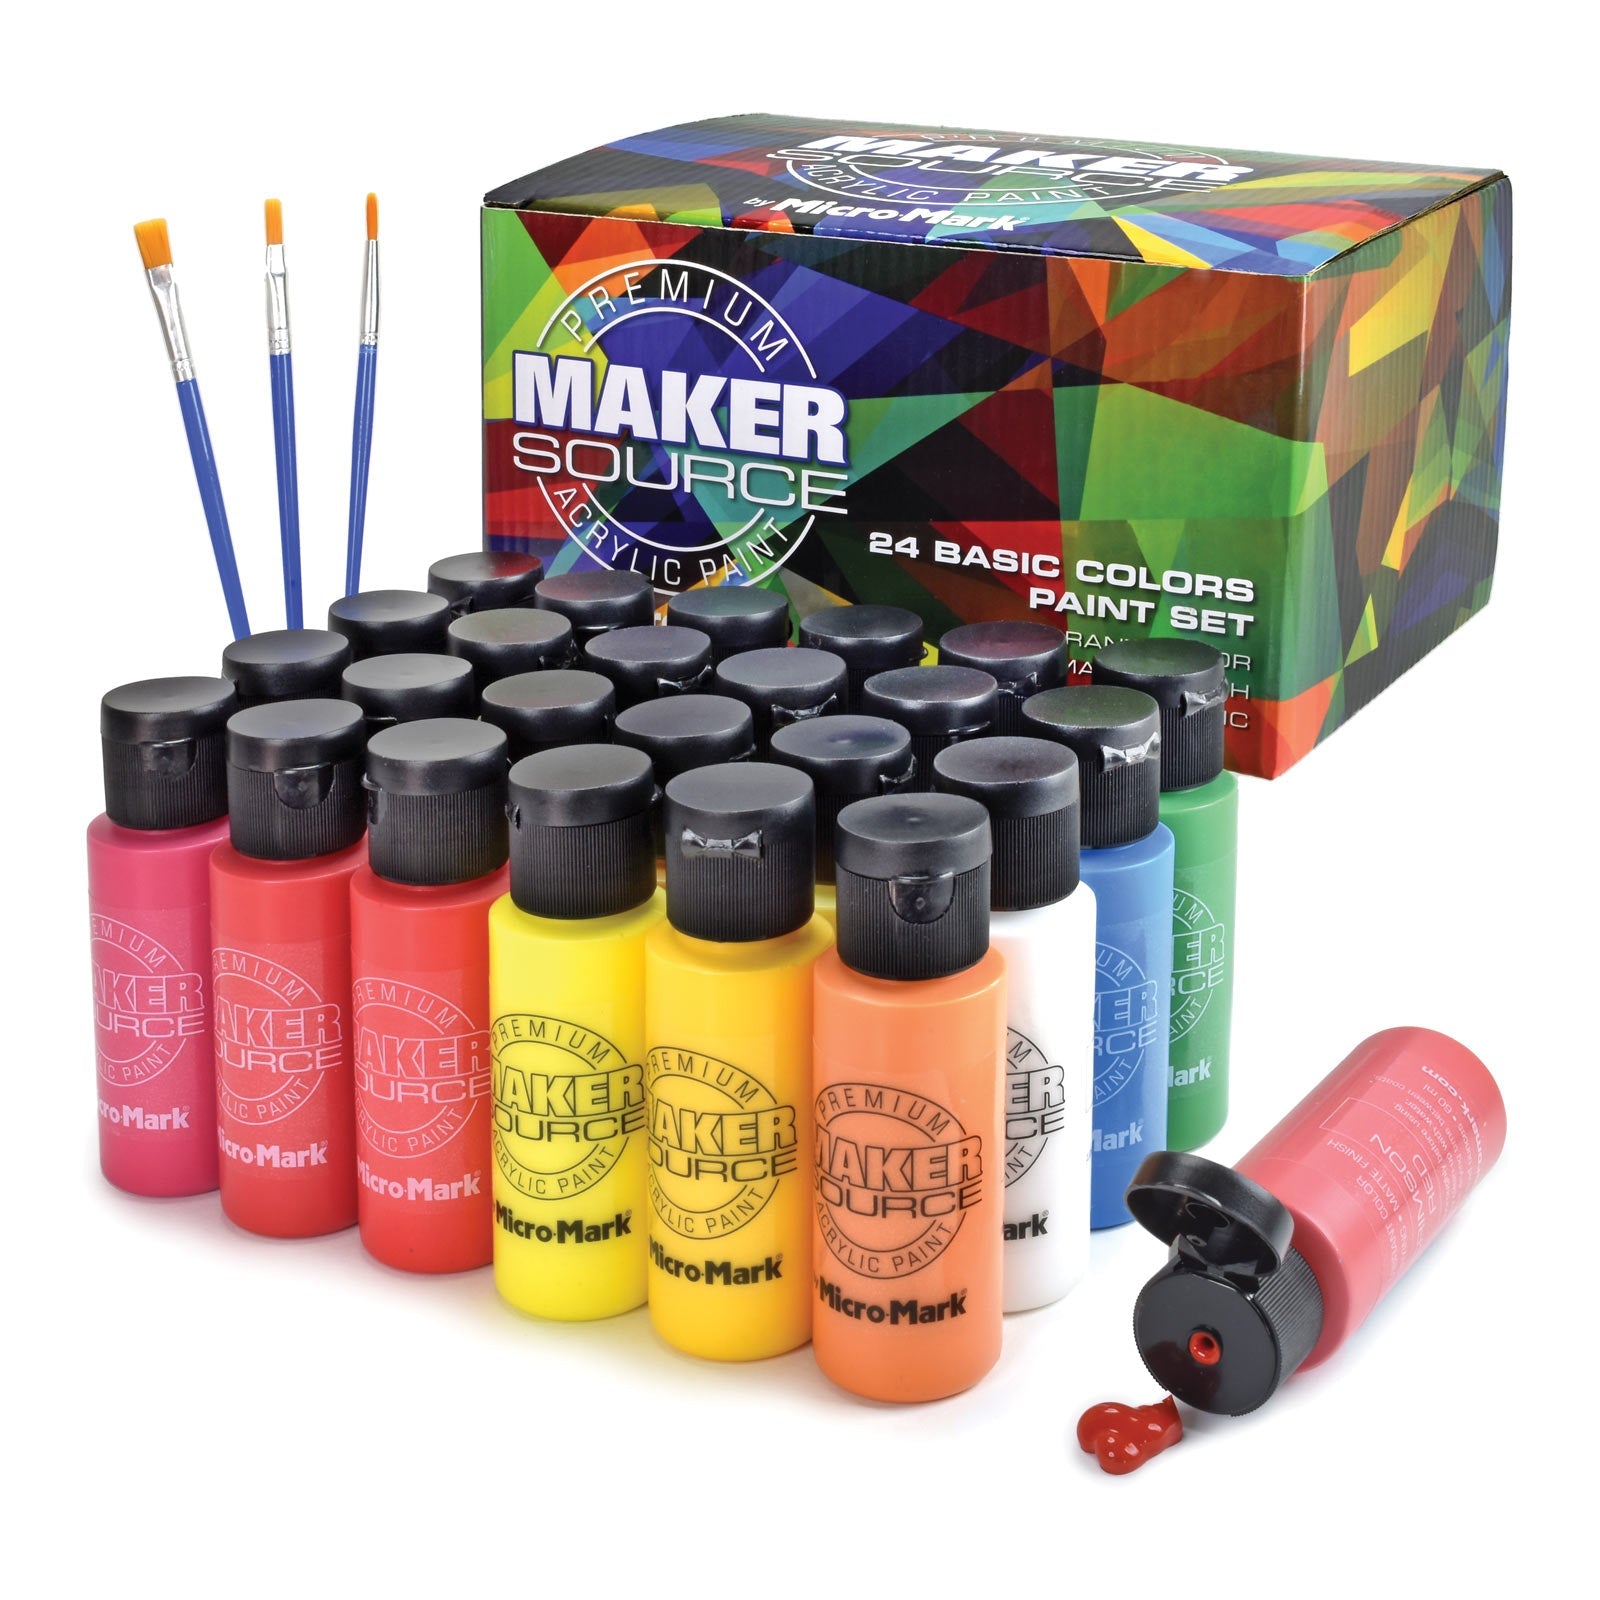 Introducing Maker Source by Micro-Mark 24 Colors Basic Paint Set: Unleash Your Creativity! - Micro-Mark